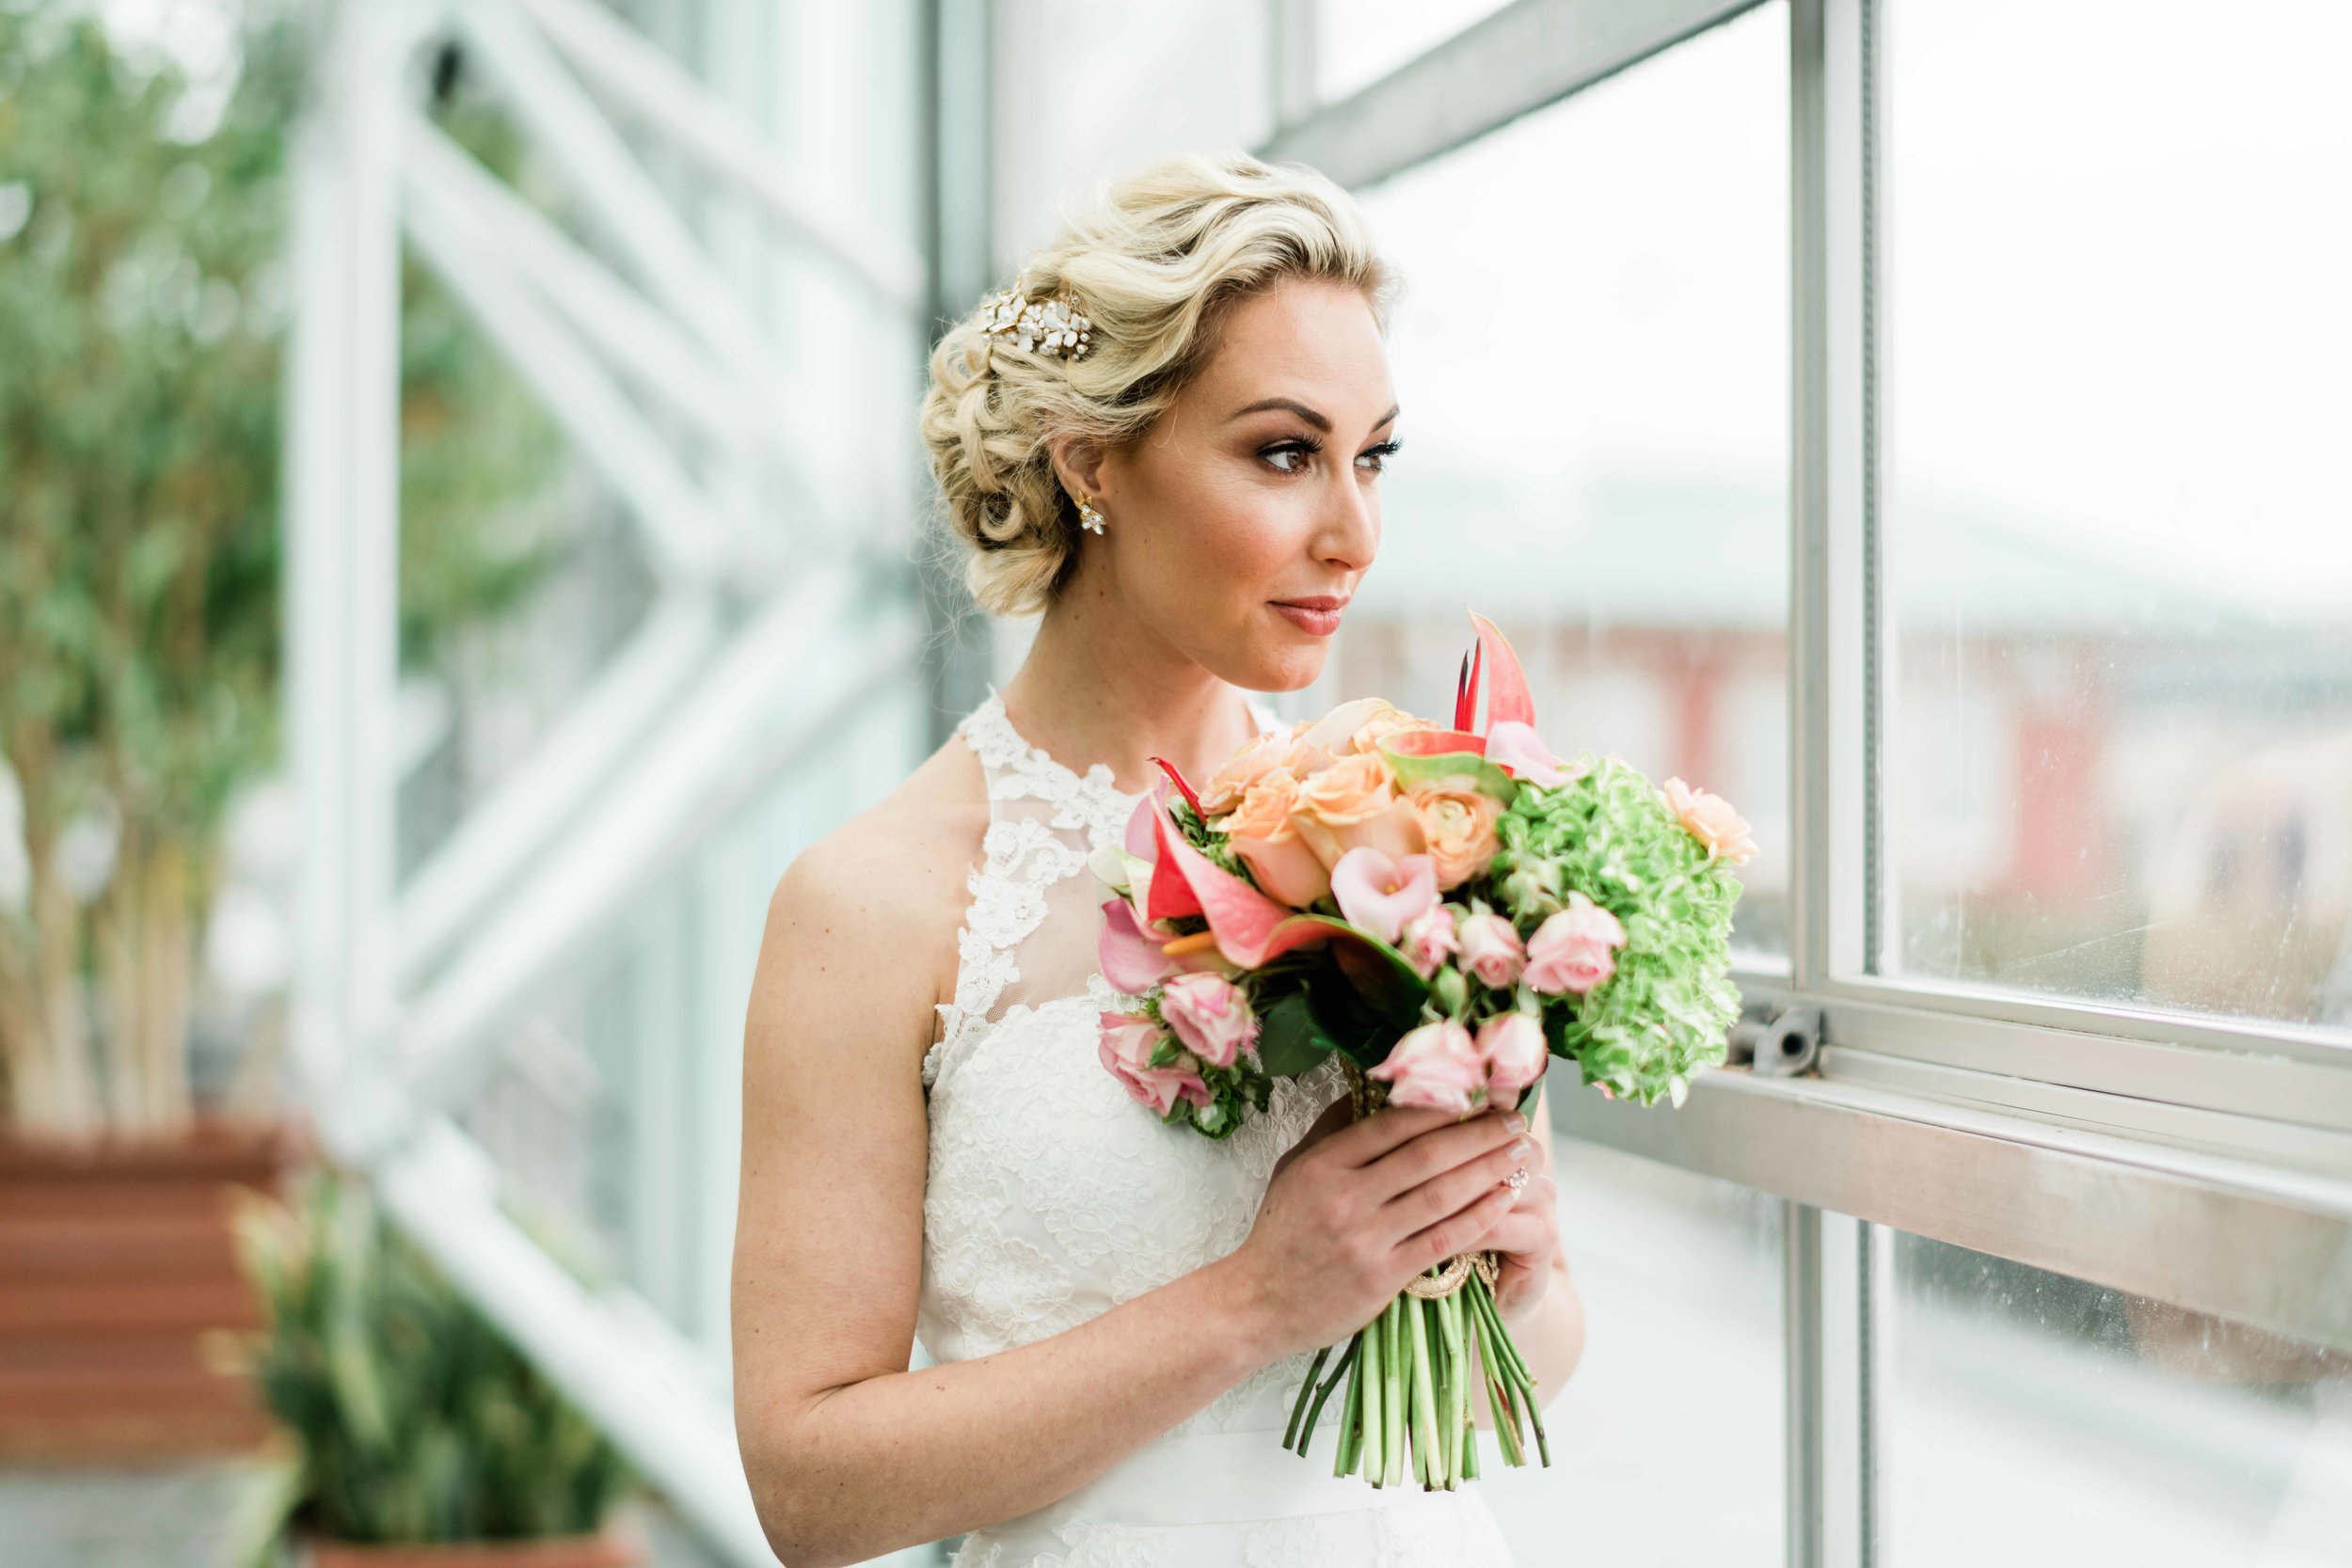 Bride looking out window with her bouquet